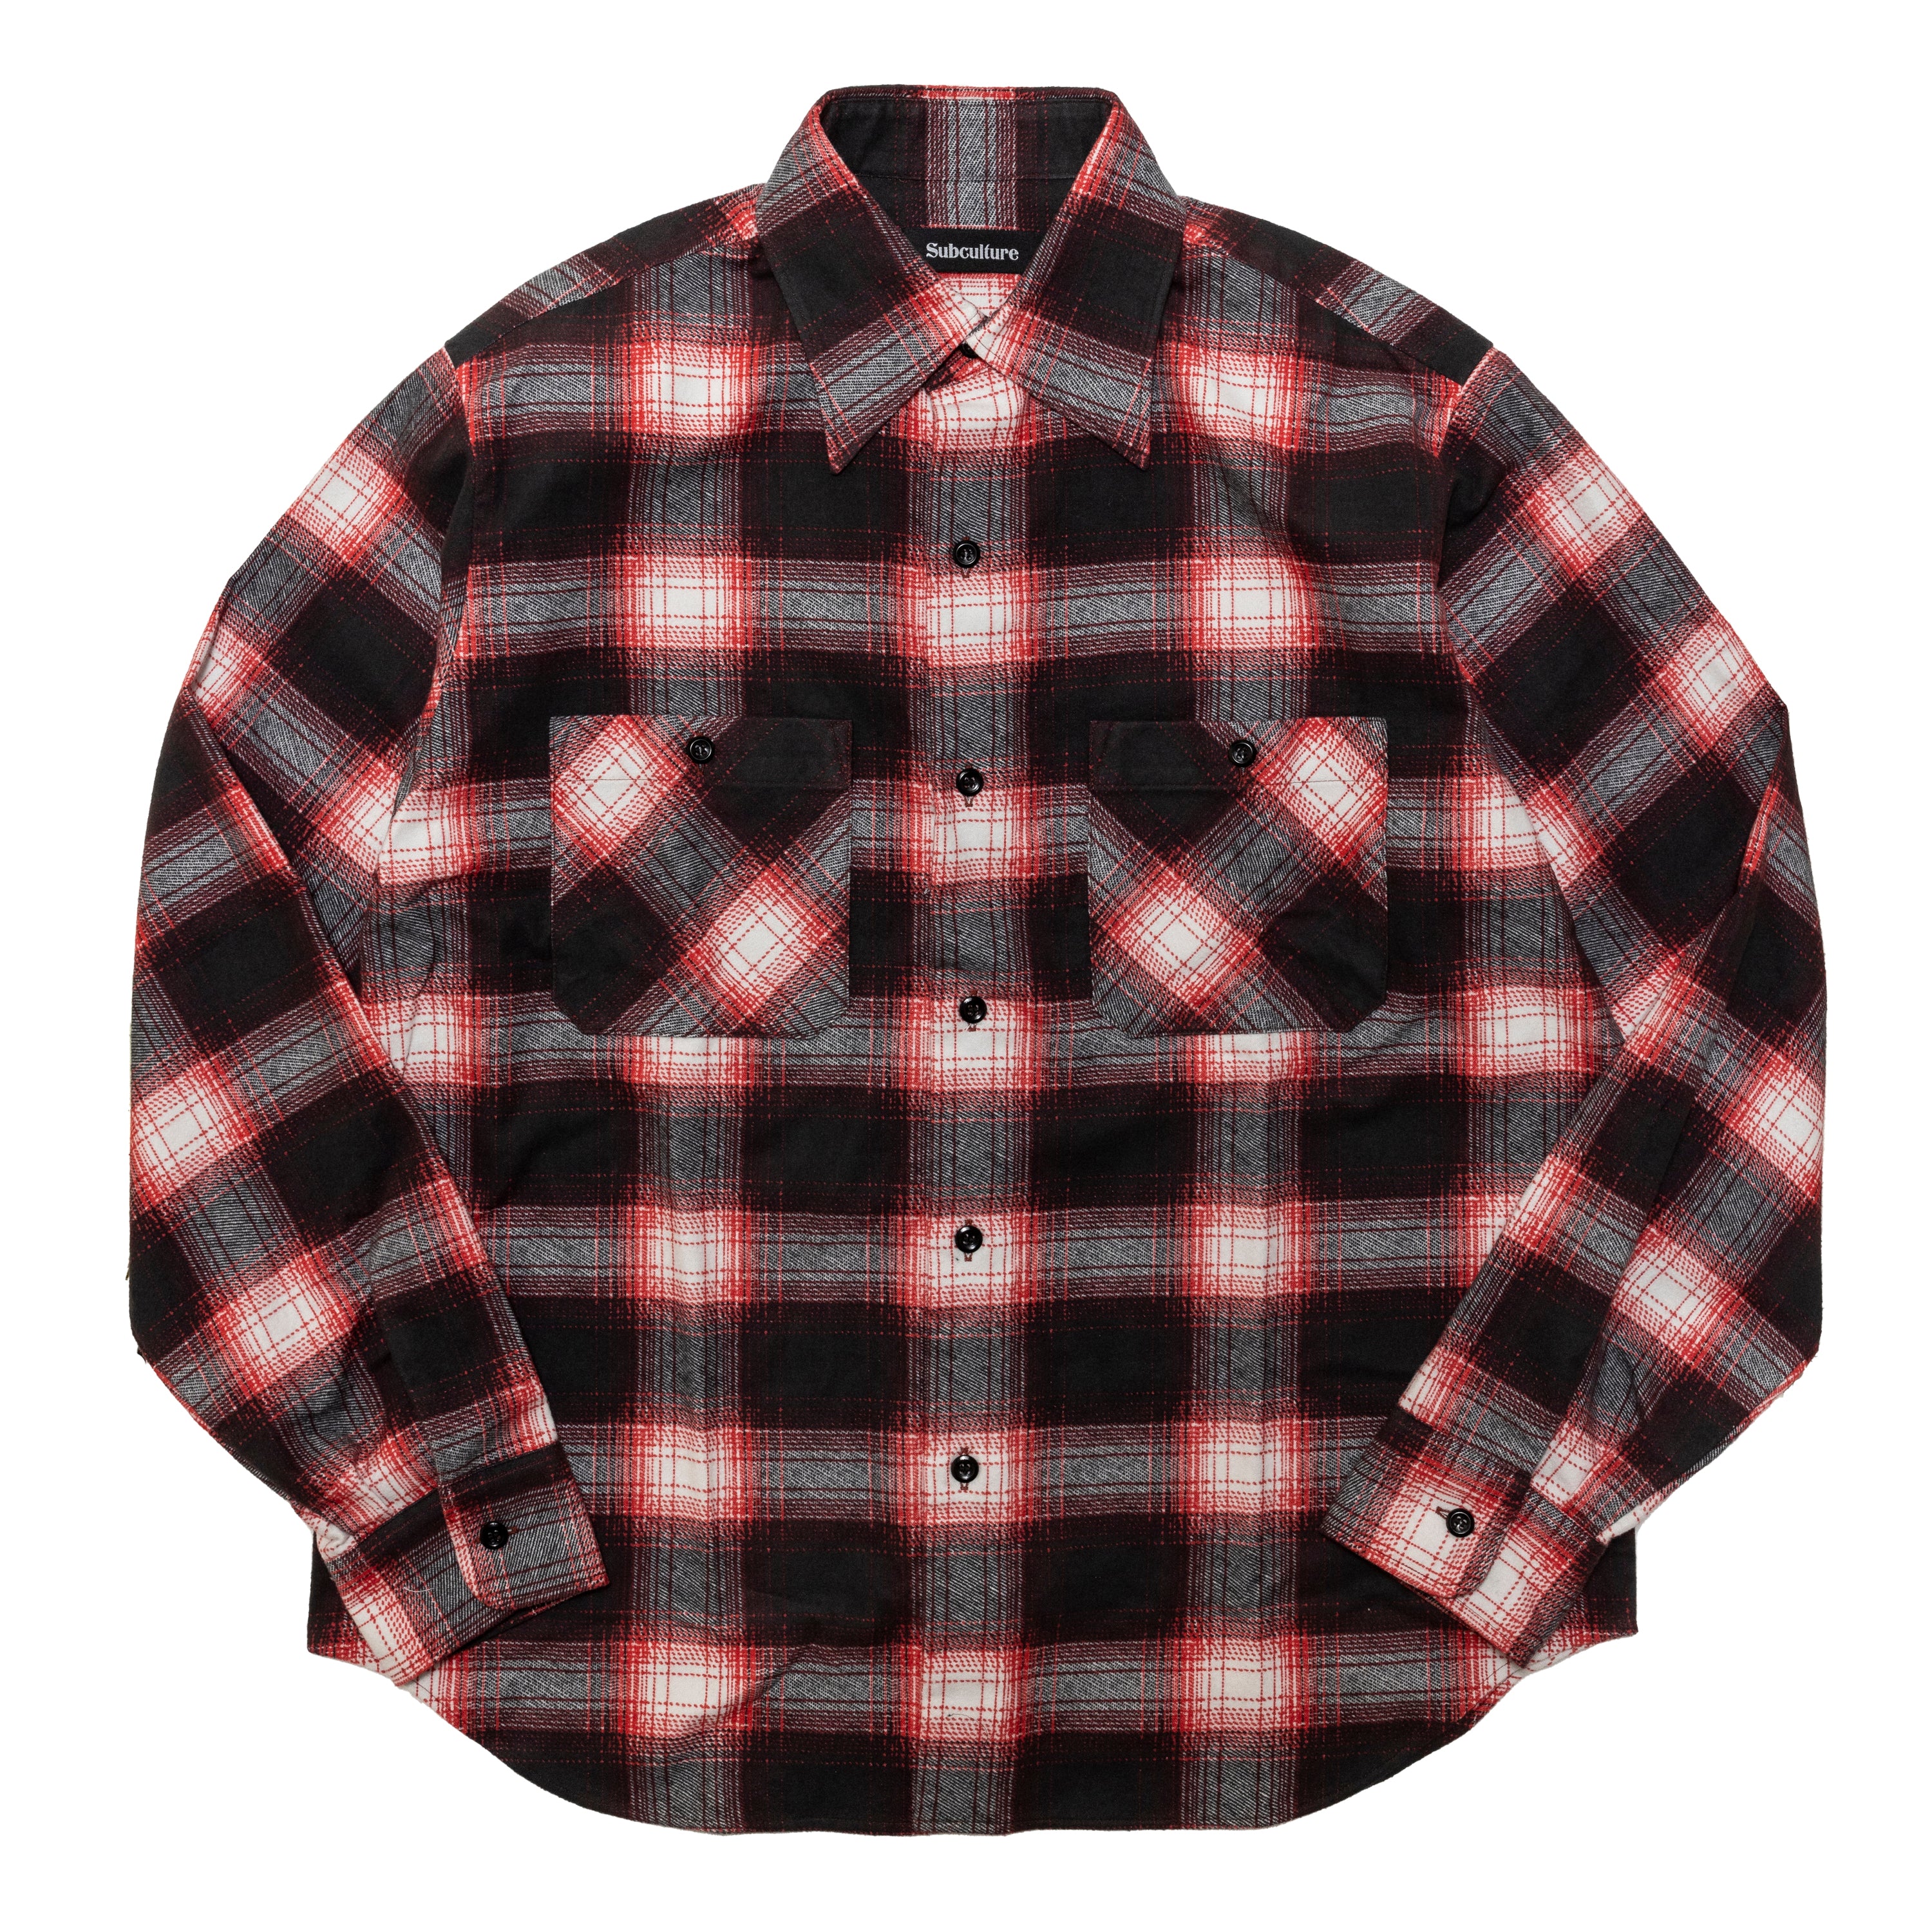 subculture  OMBRE CHECK SHIRT サブカルチャー　3試着のみの美品です